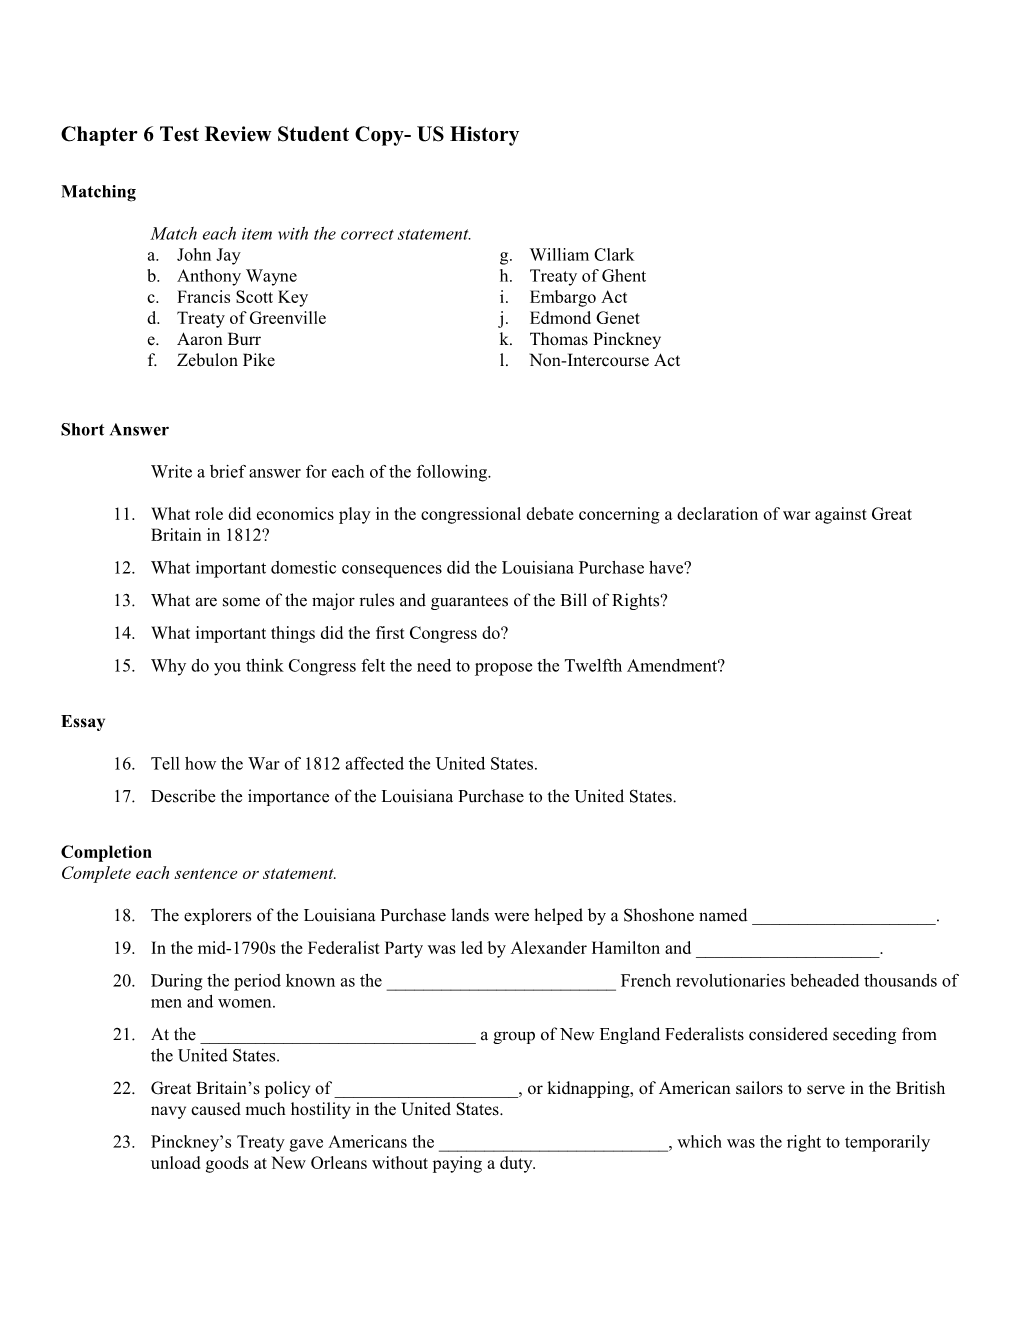 Chapter 6 Test Review Student Copy- US History